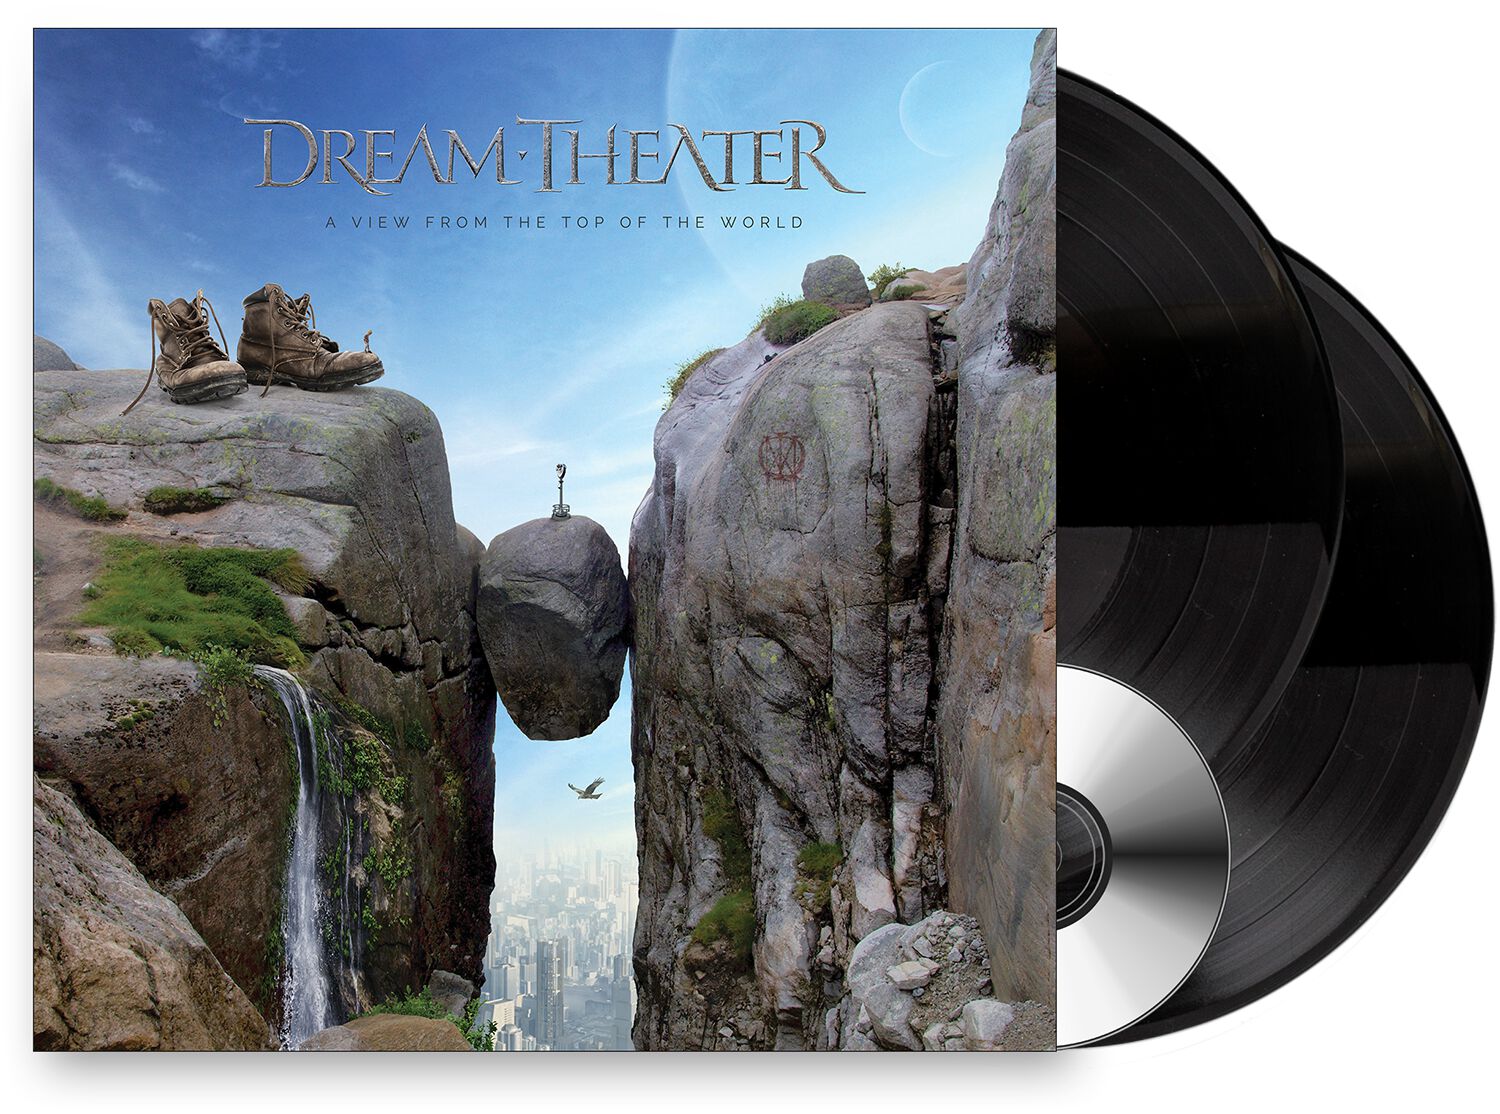 DREAM THEATER - A View from the Top of the World (Gatefold 2LP+CD+LP booklet)